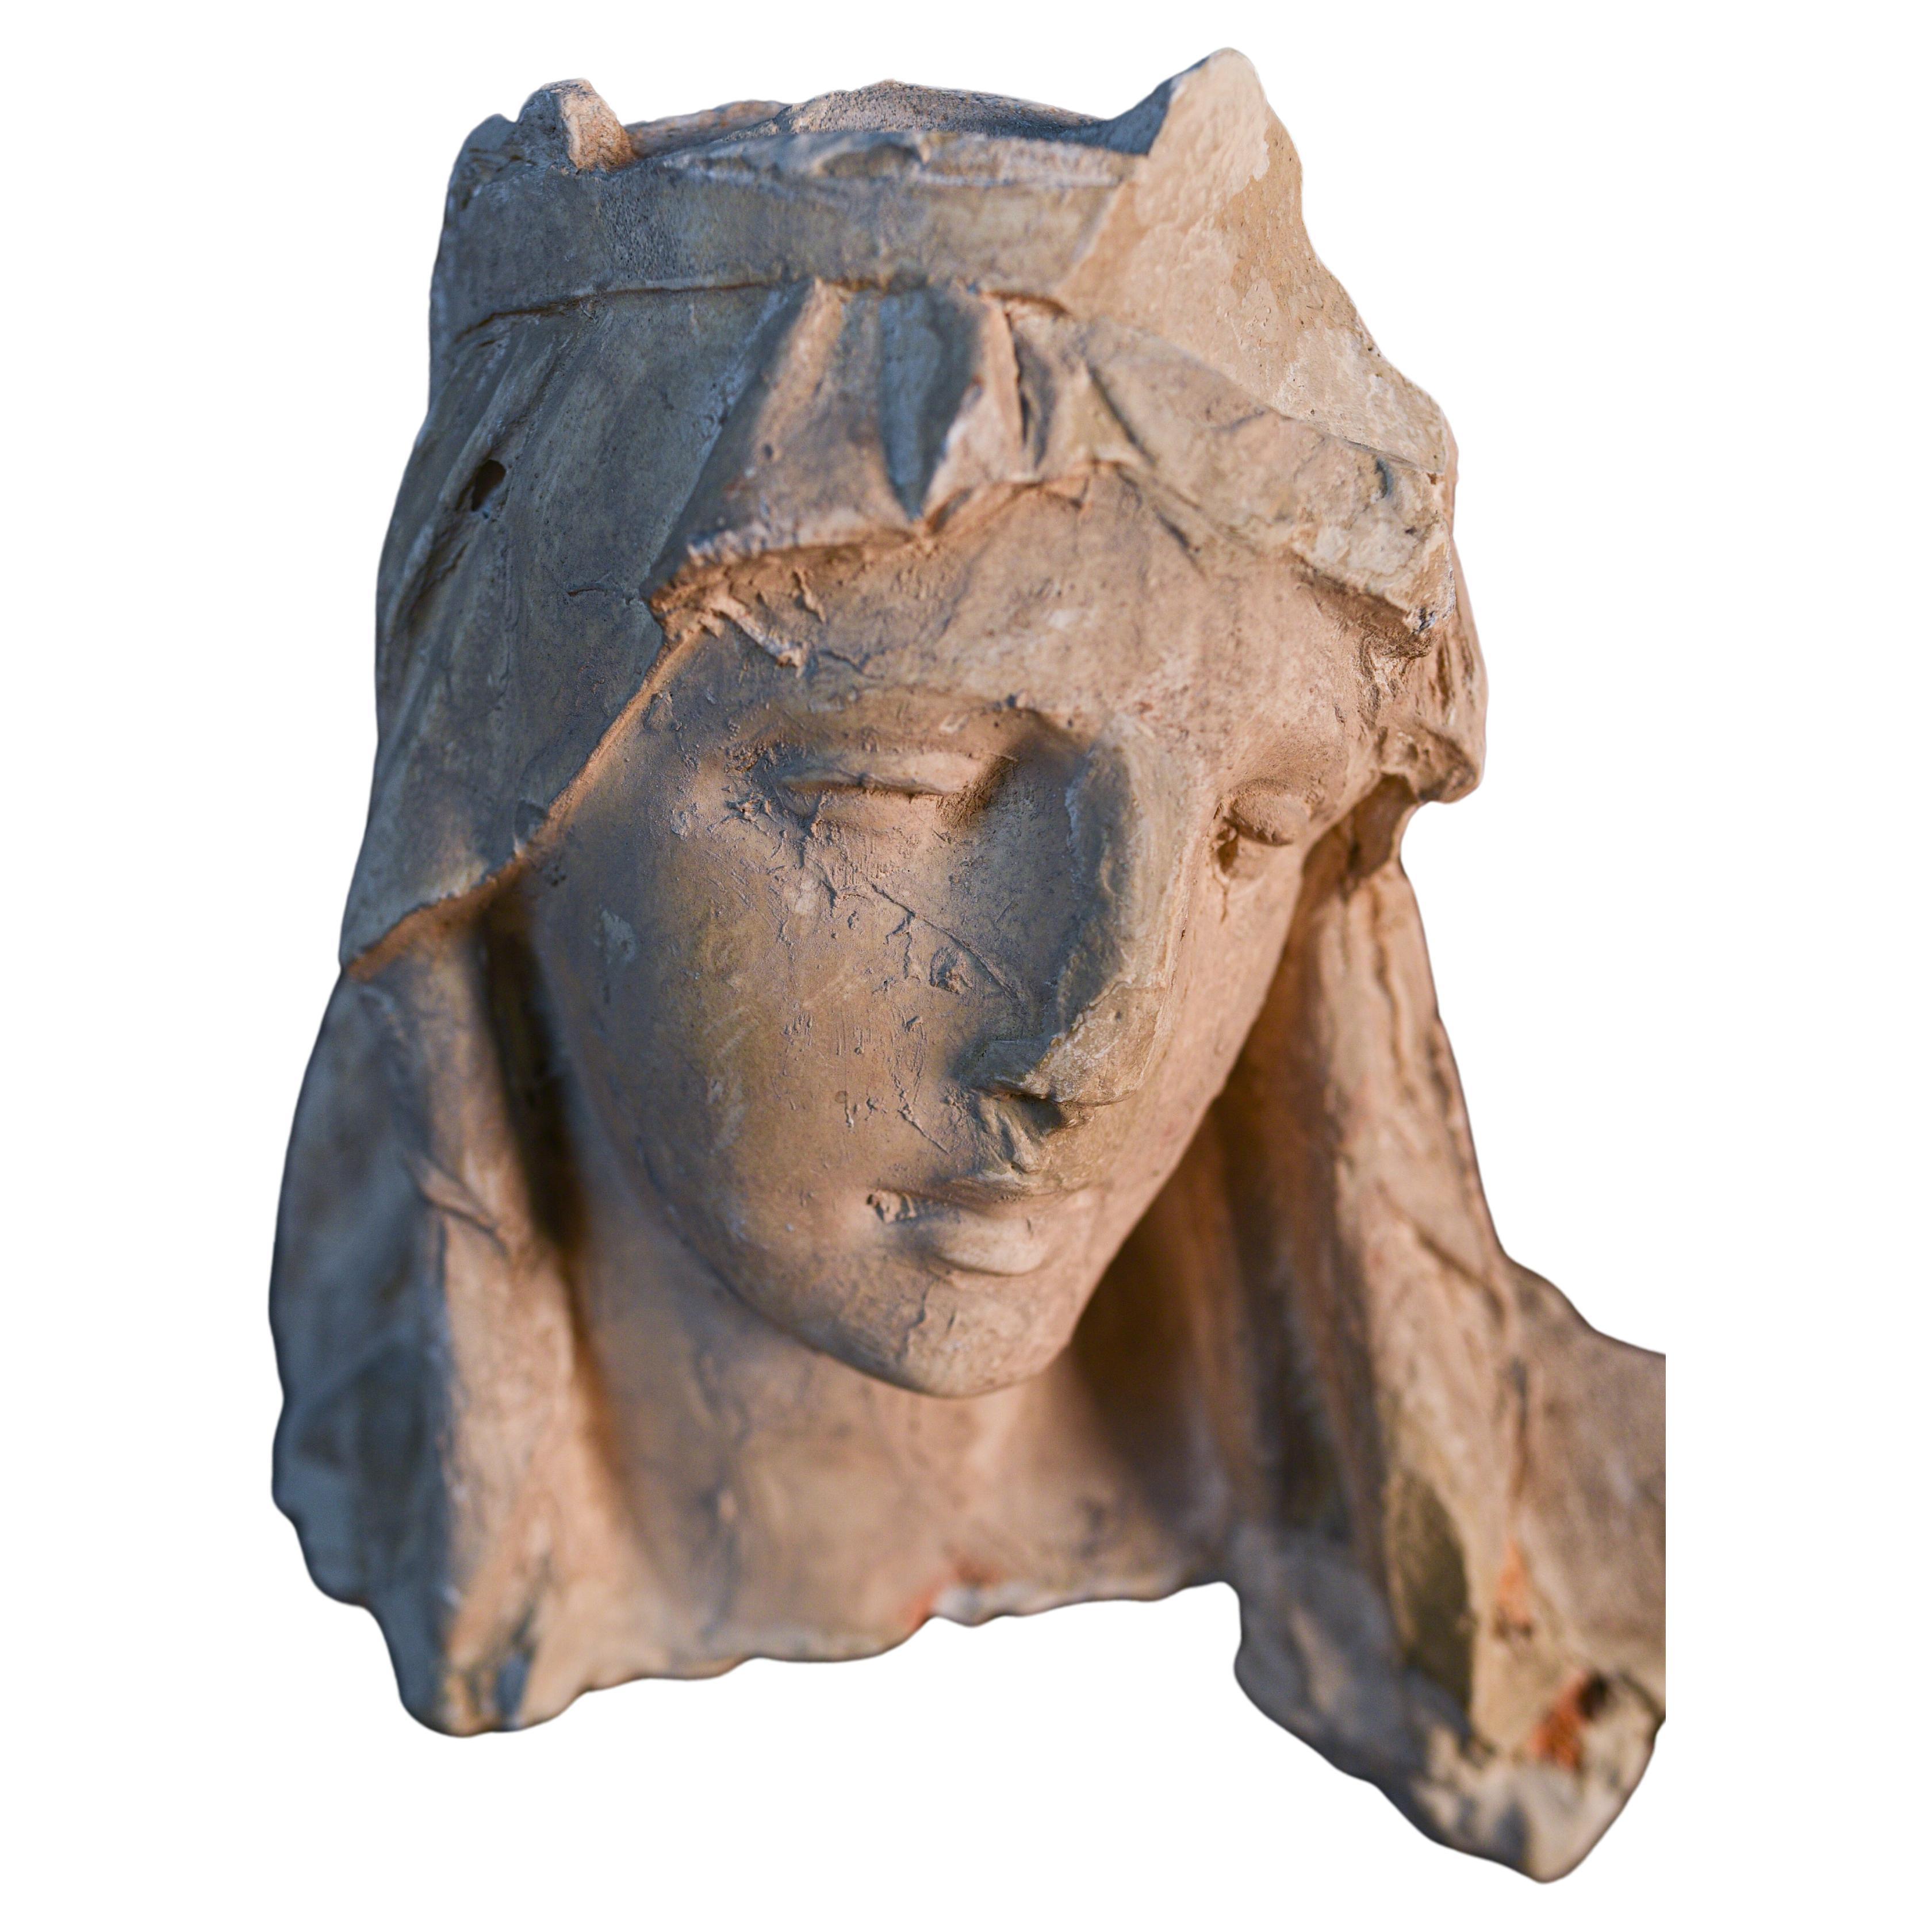 Neoclassical sculpture of Mother Mary's head, made from plaster and straw 